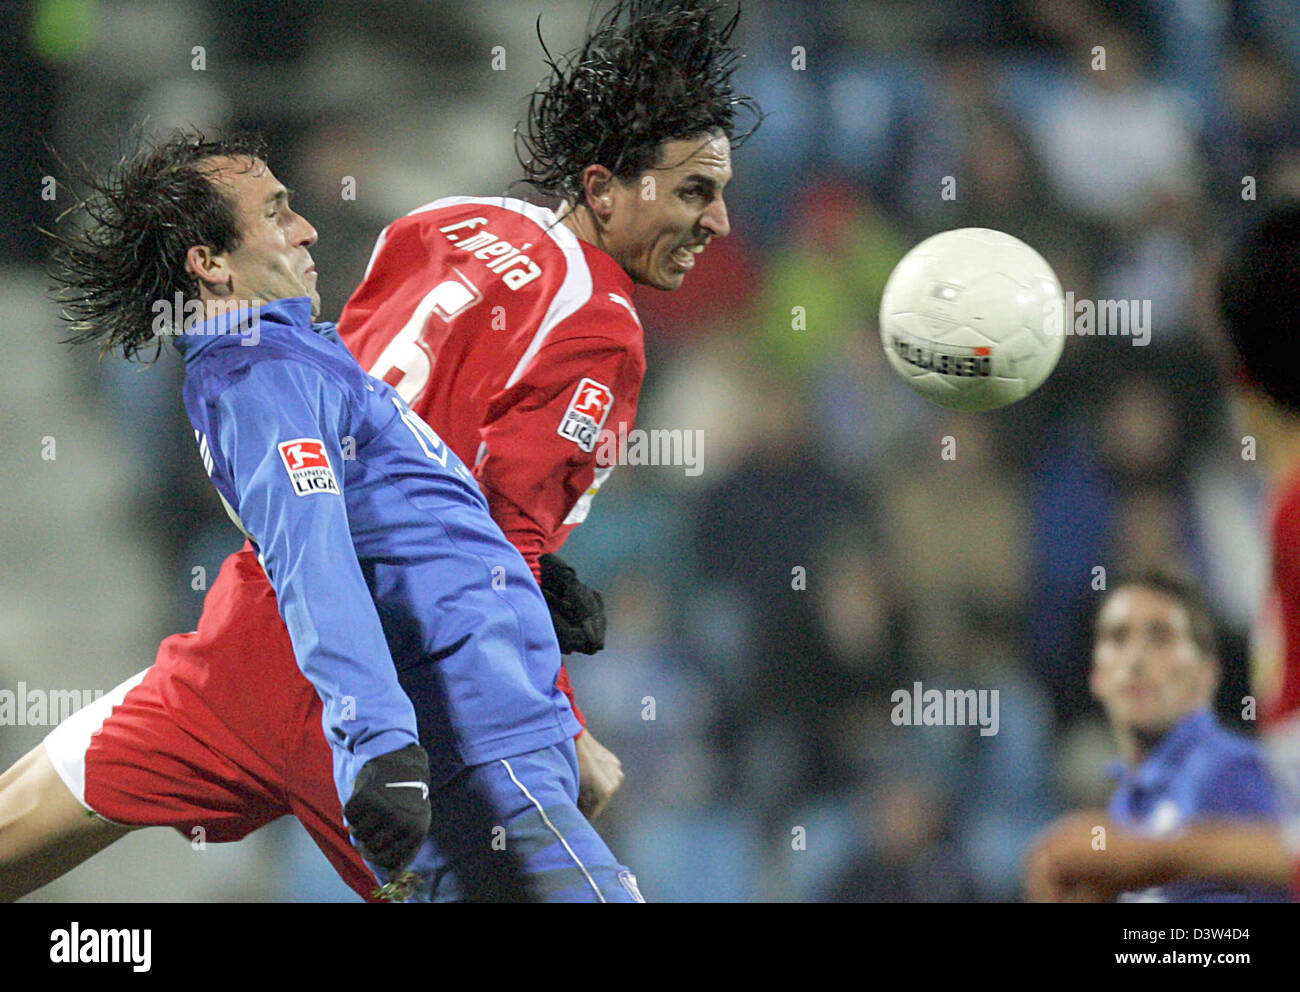 Fernando Meira (R) of Stuttgart vies for the ball with Theofanis Gekas of Bochum during the round of the last 16 German Cup match at the rewirpower stadium in Bochum, Germany, Tuesday, 19 December 2006. Bochum lost the match 1-4. Photo: Bernd Thissen Stock Photo